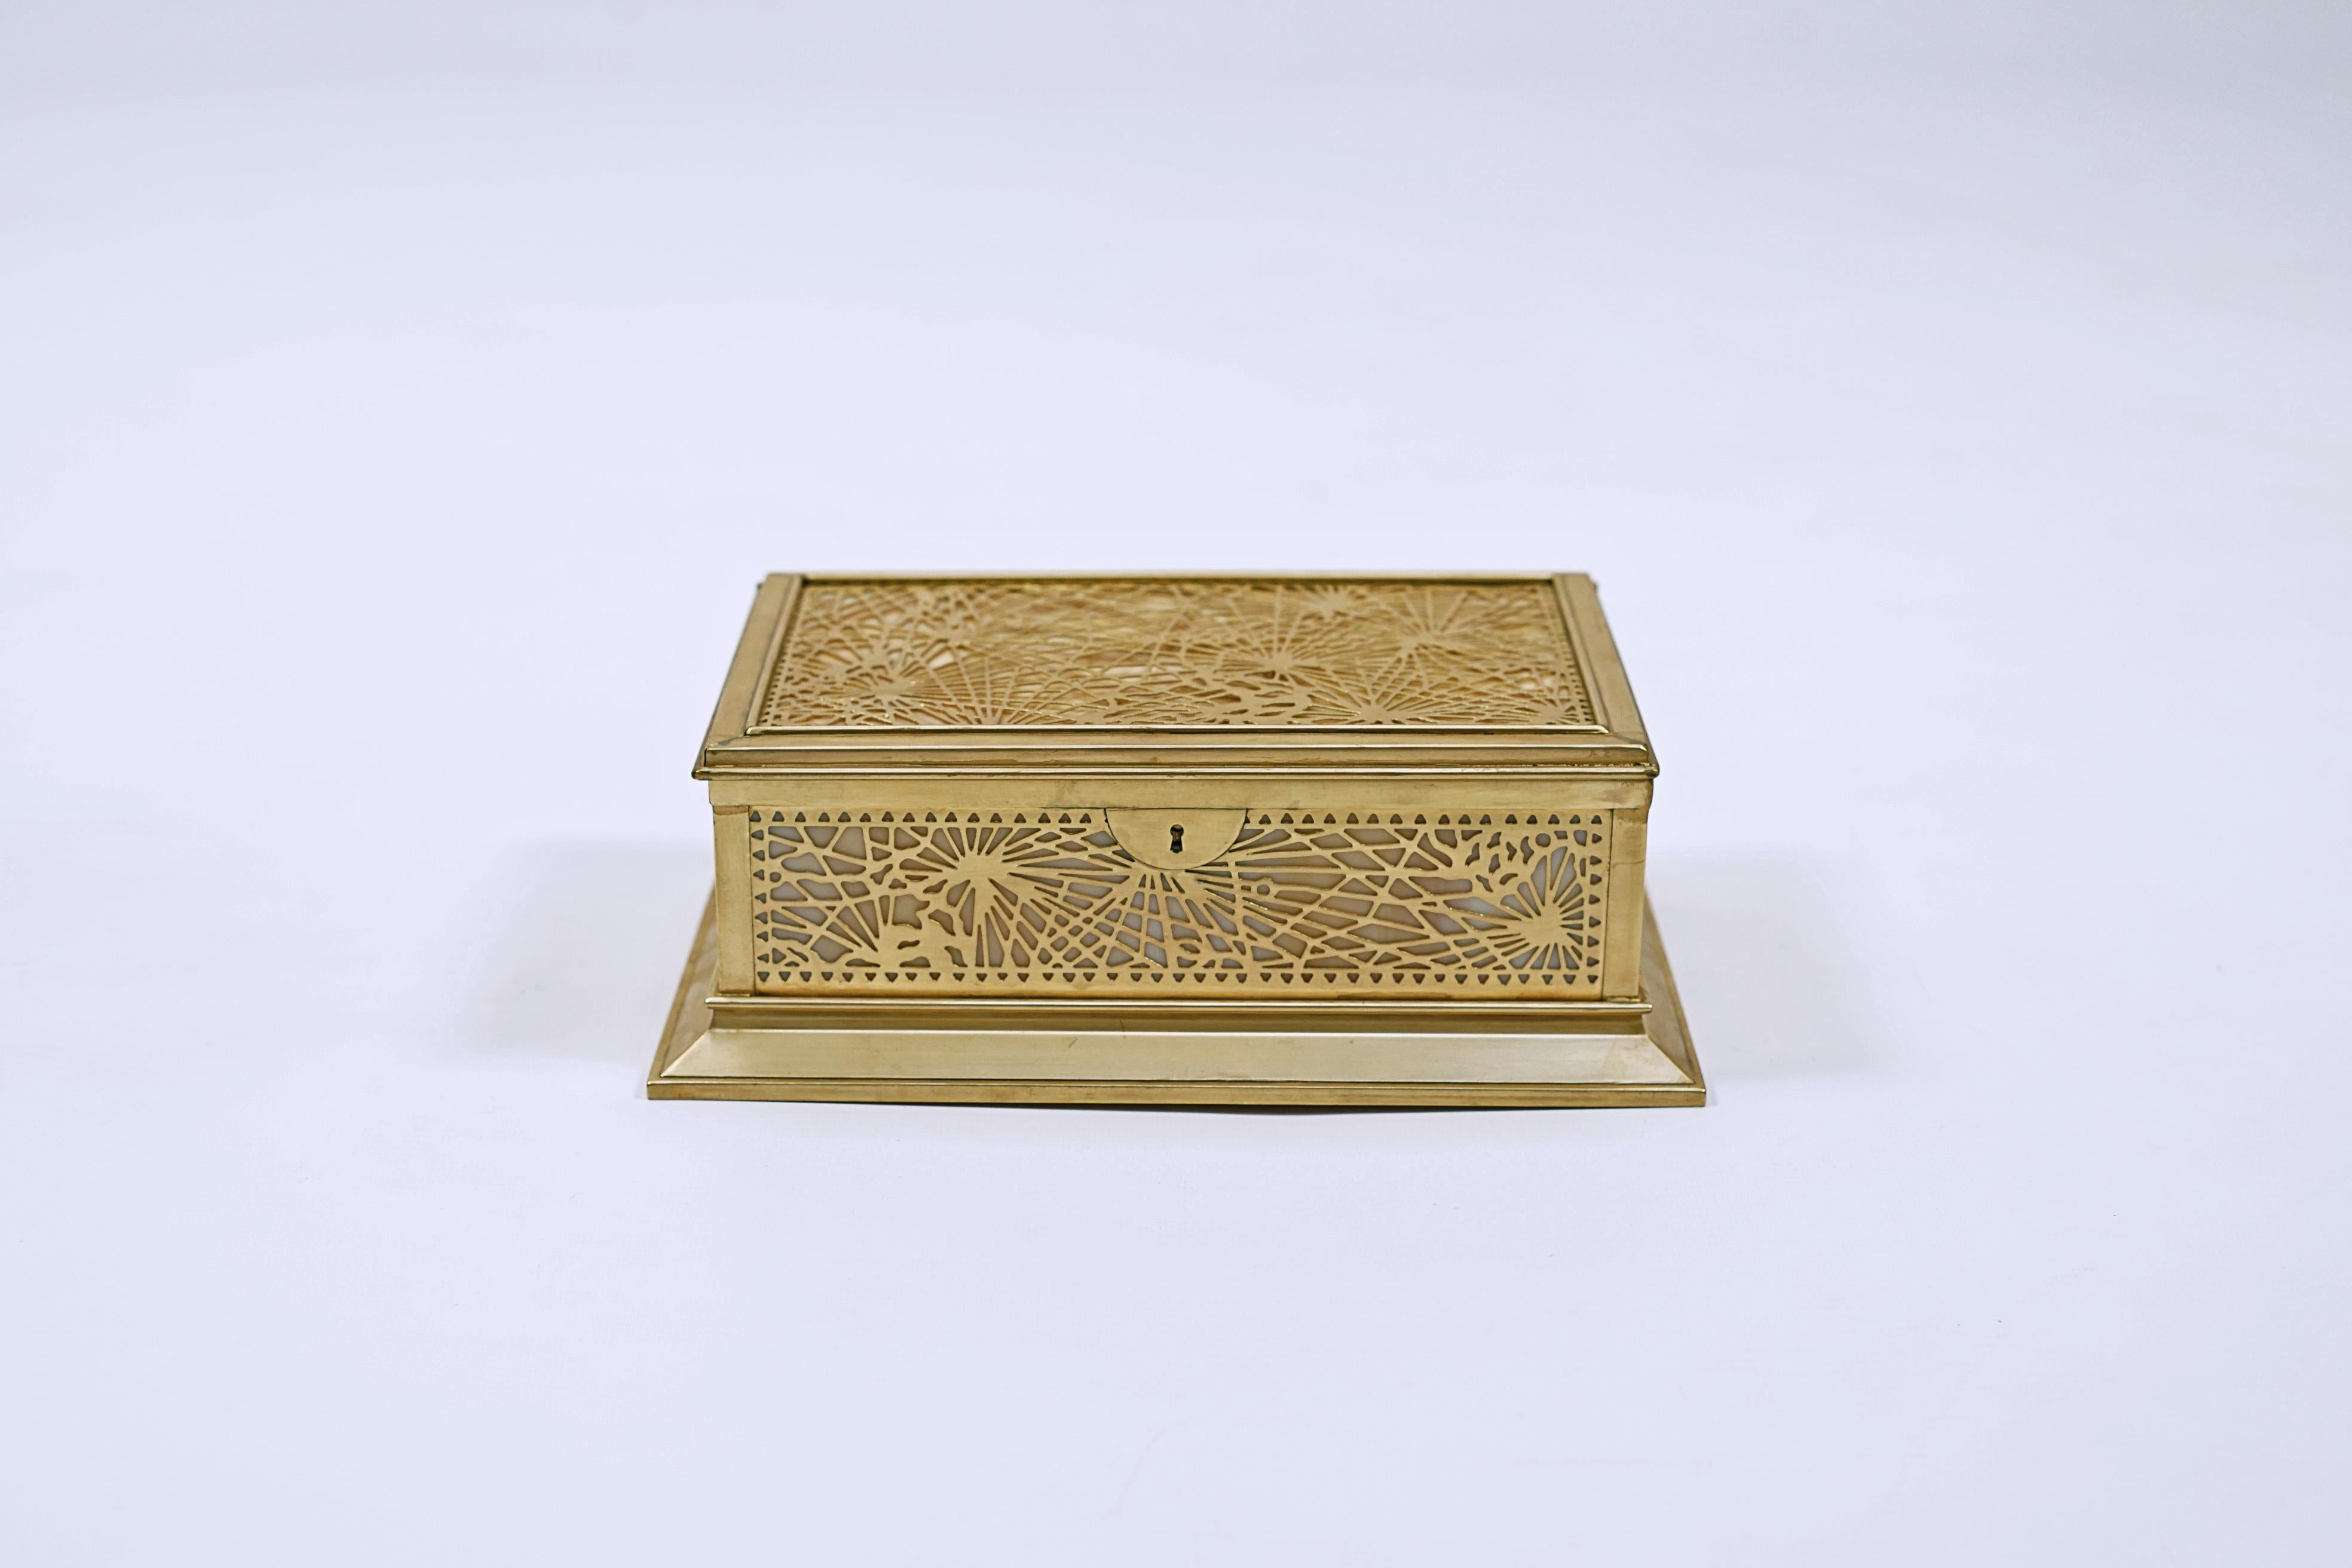 Bronze box with white and orange glass paste, Pine Needle model, made by TIFFANY & Co, (1837 to the present).

Signed TIFFANY STUDIOS, NEW YORK, 823.

USA, CIRCA 1910.